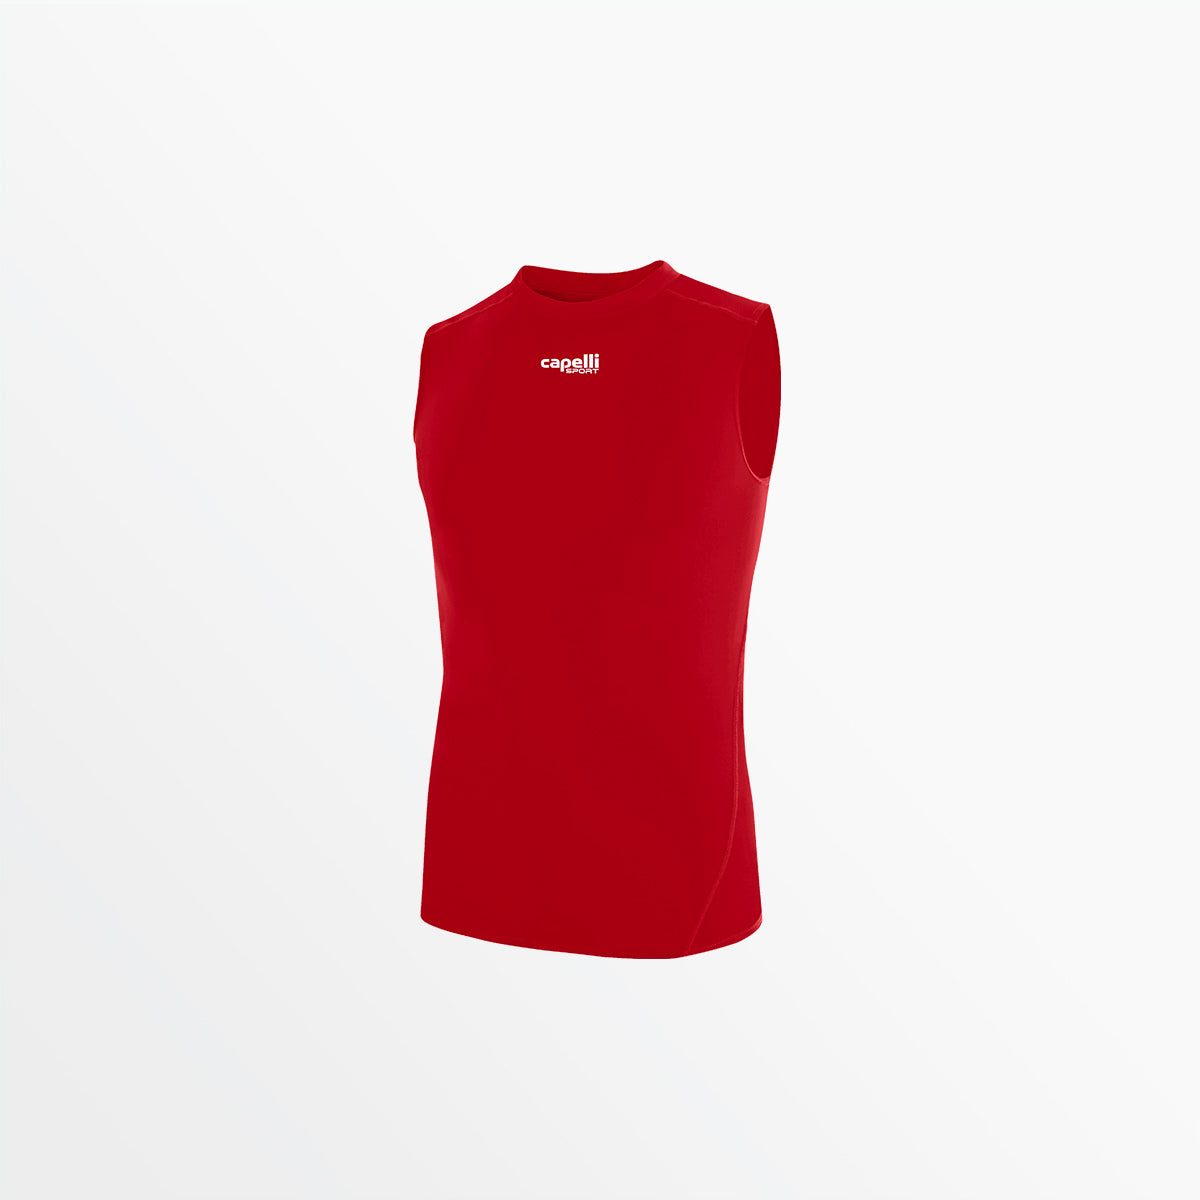 YOUTH SLEEVLESS PERFORMANCE TOP